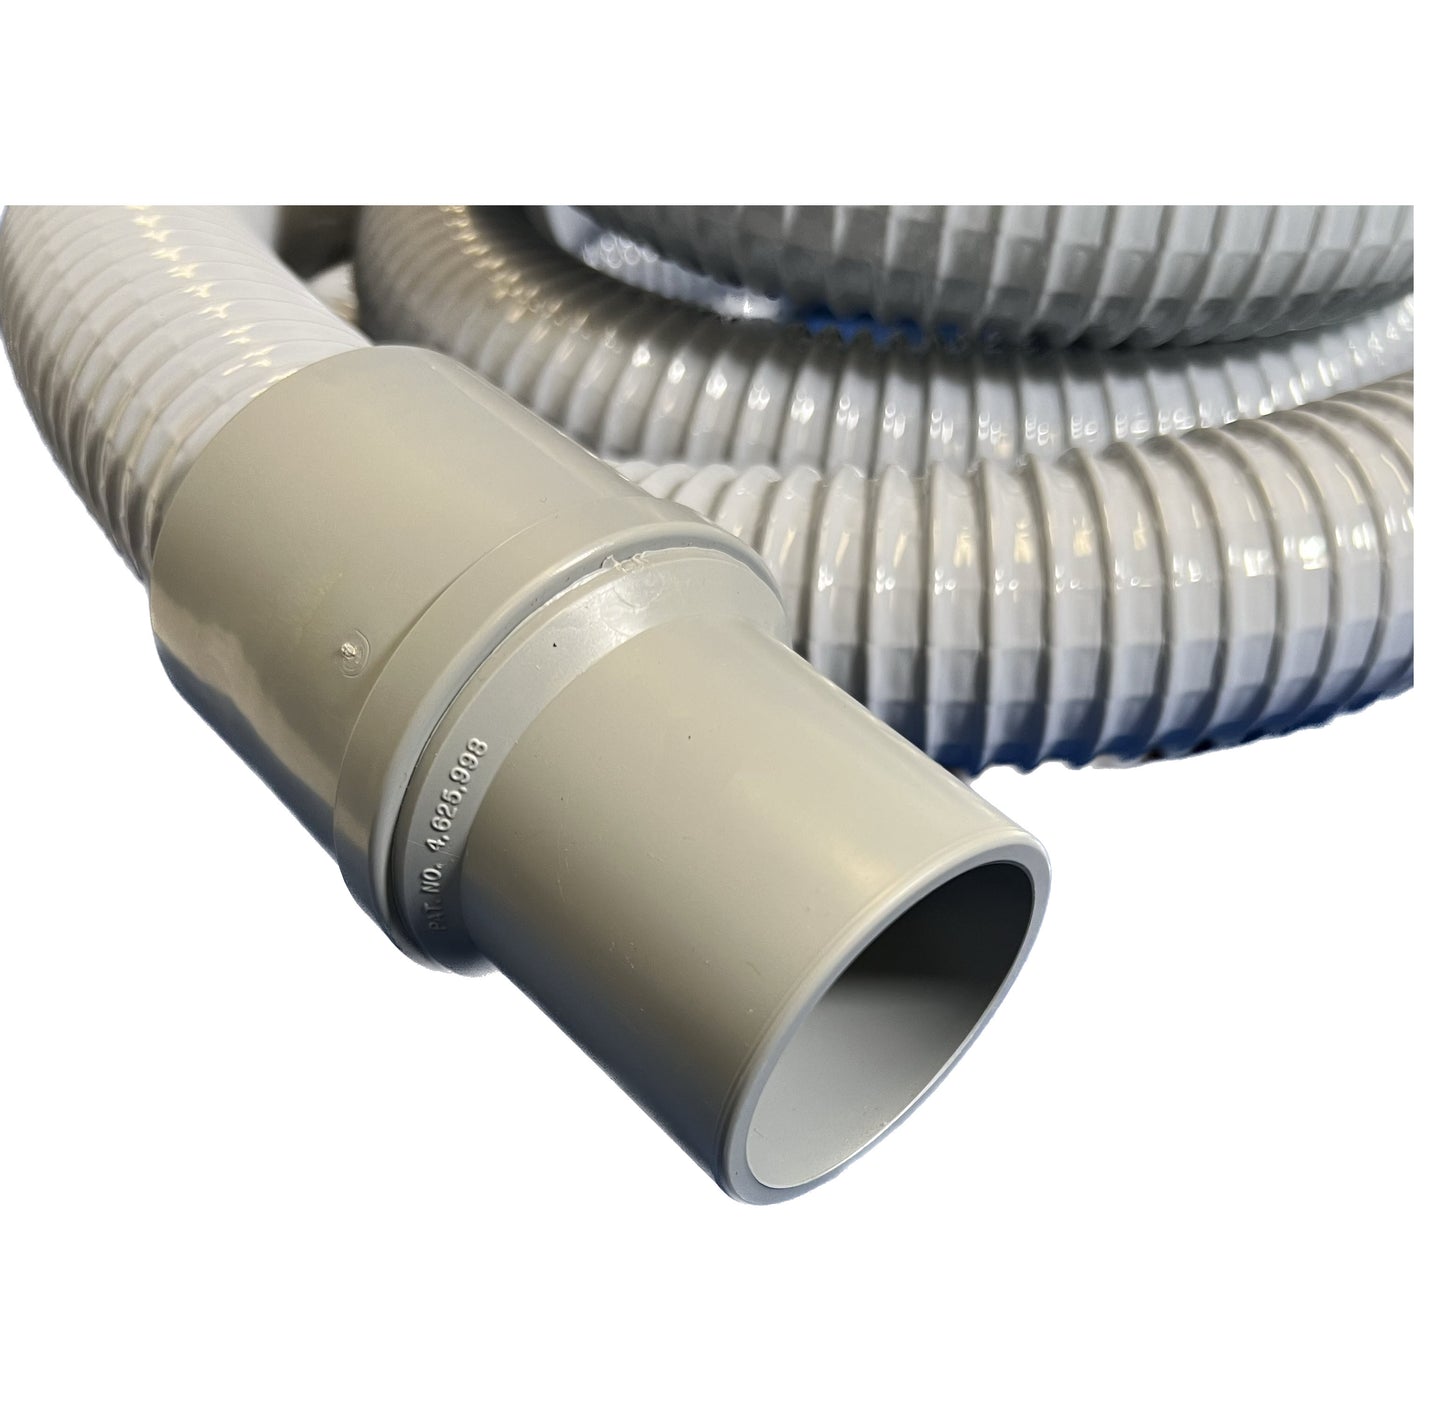 2" Flexible Plastic Grounded Vacuum Hose with Cuffs, Flexaust Dayflex® Flex-Vac® PVC Hose, Gray Color, 10', 15', 25' and 50' Lengths Available, Fits Non-Latching Inlet Valves